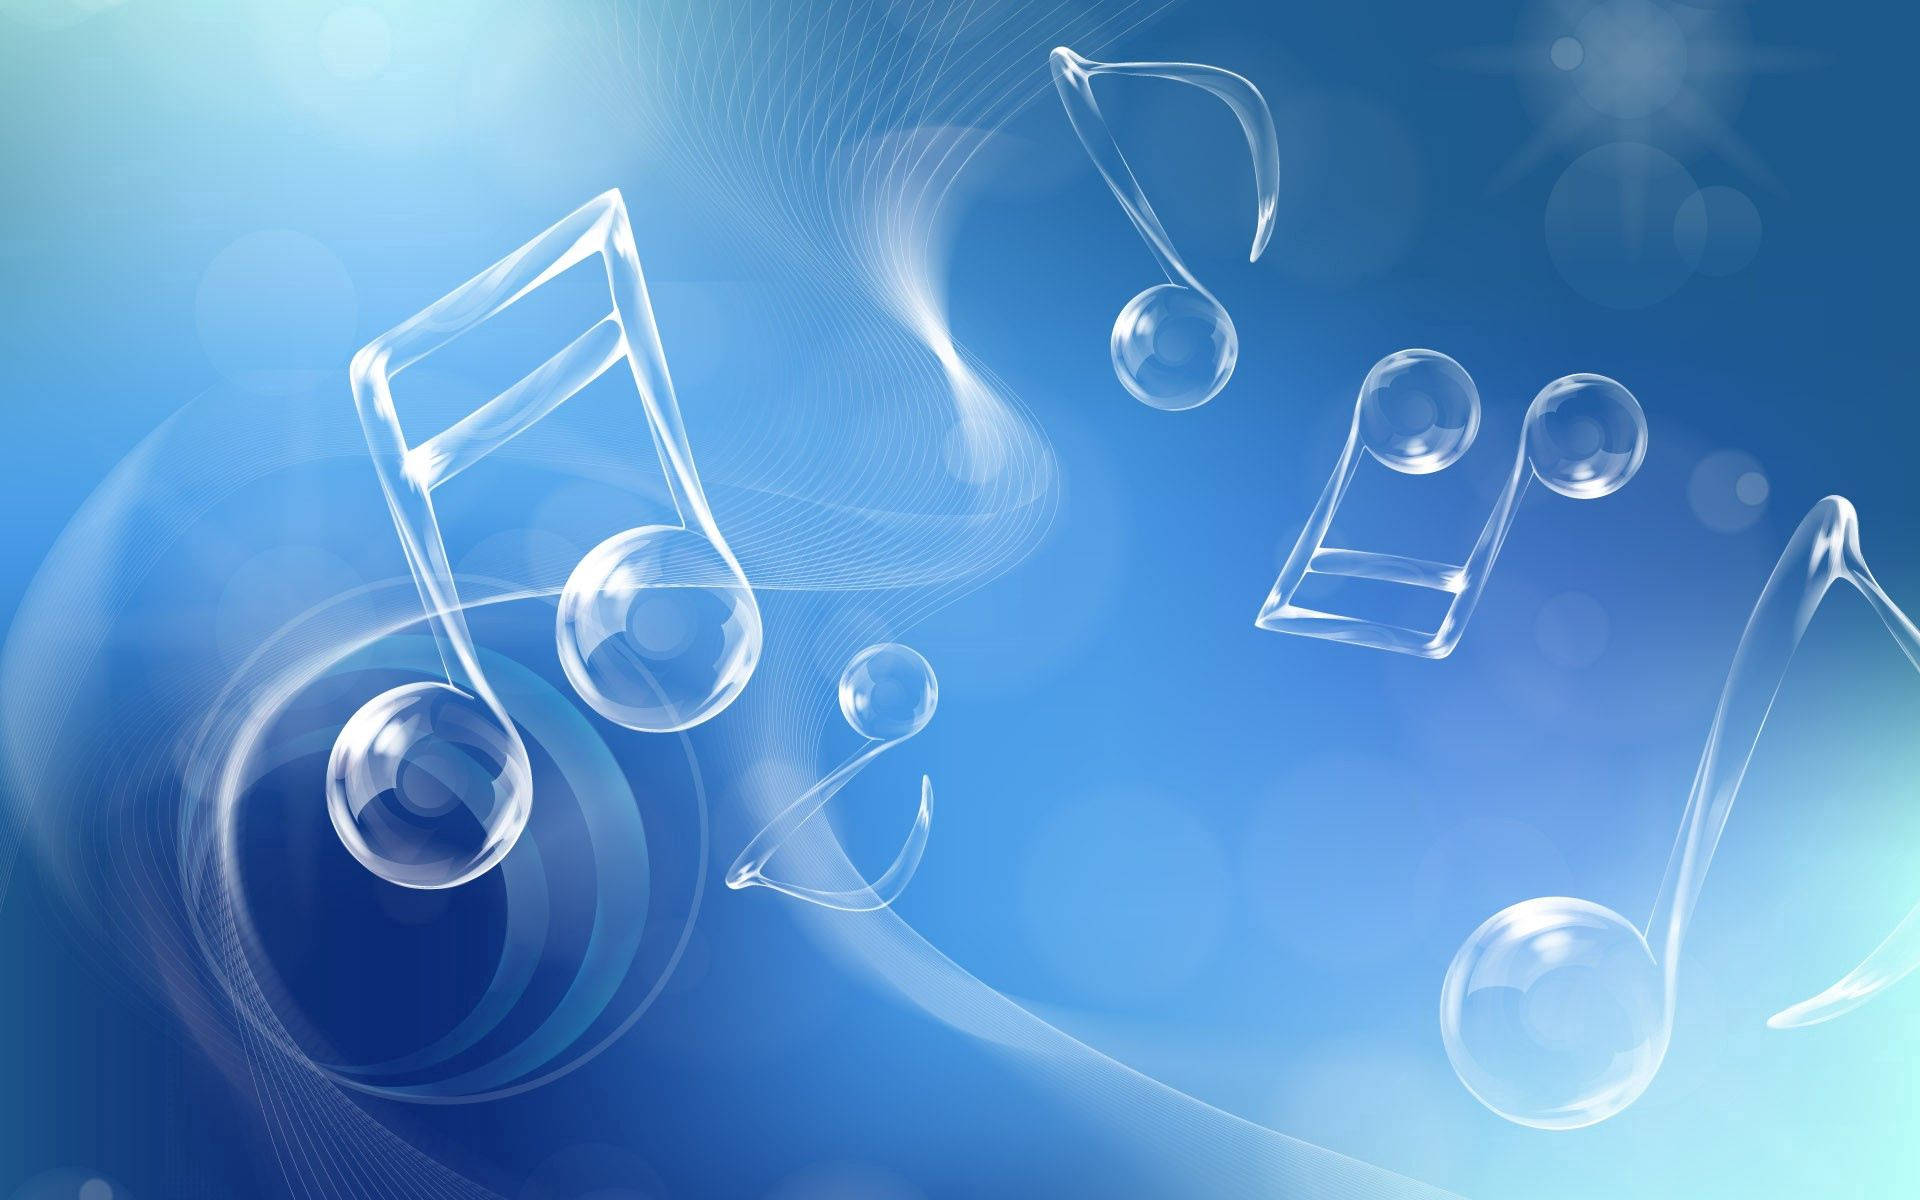 Catch the rhythm of the blues! Wallpaper